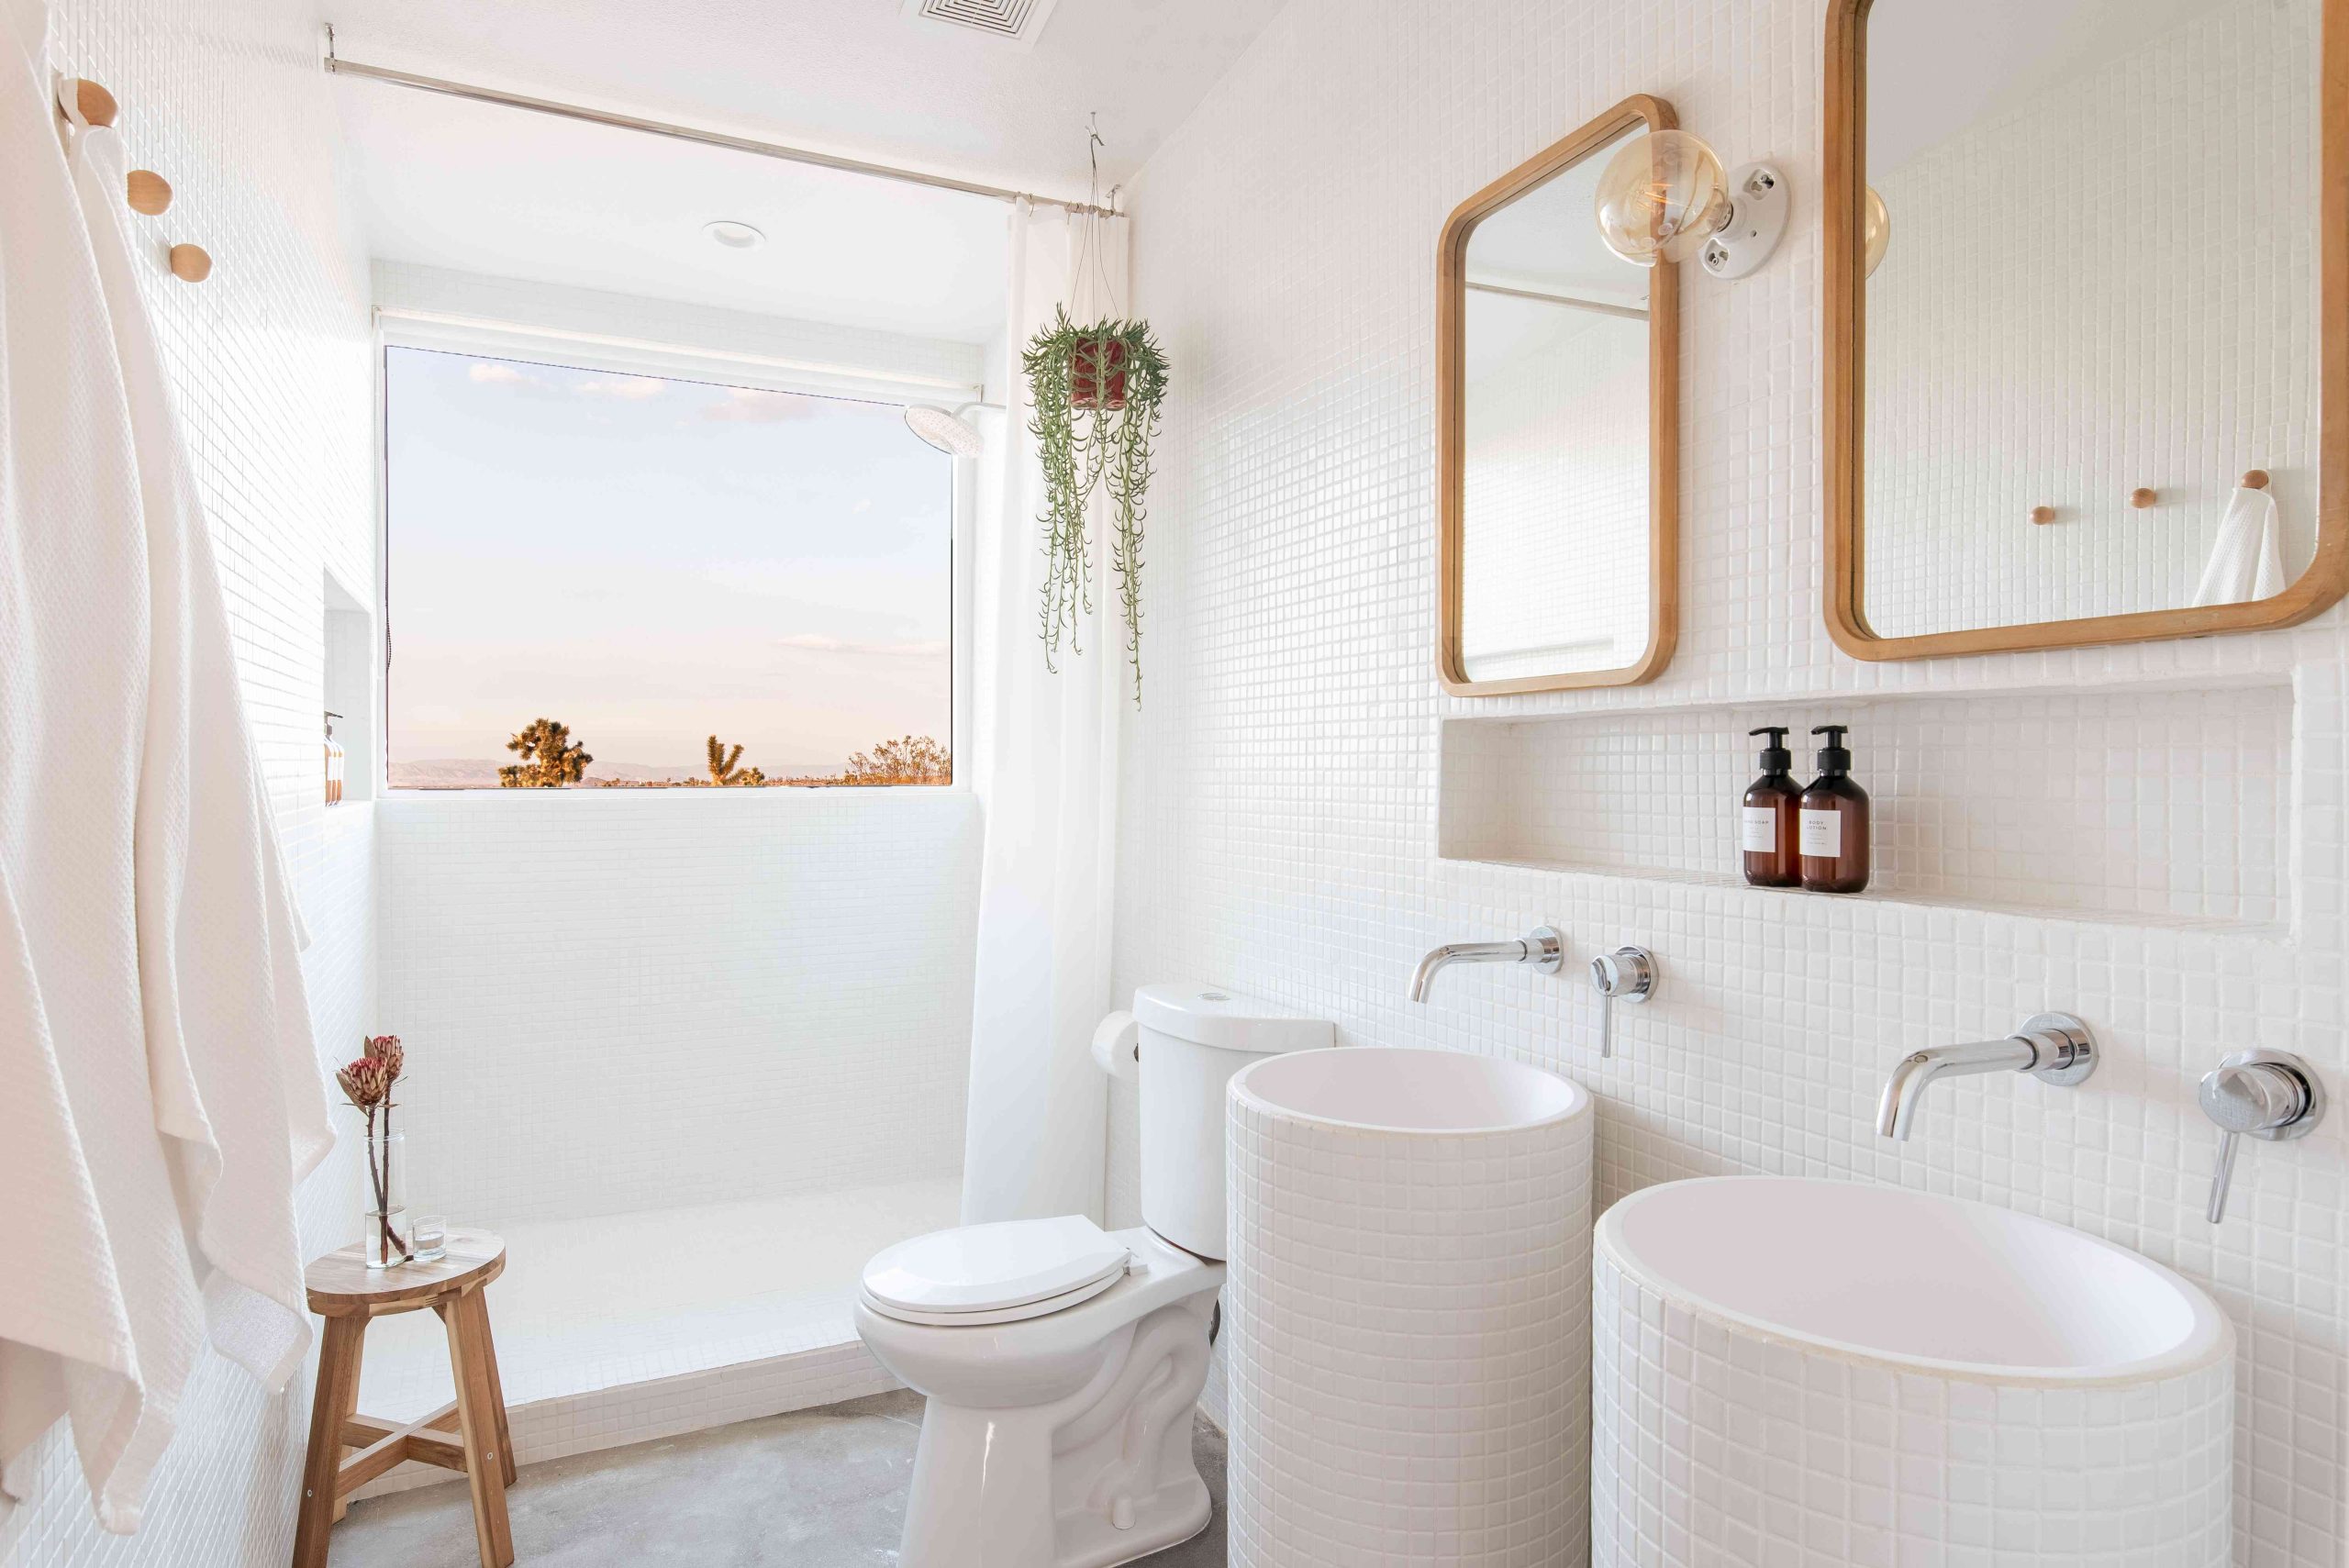 Small Bathroom Remodel: Cost, Planning, and Design Tips